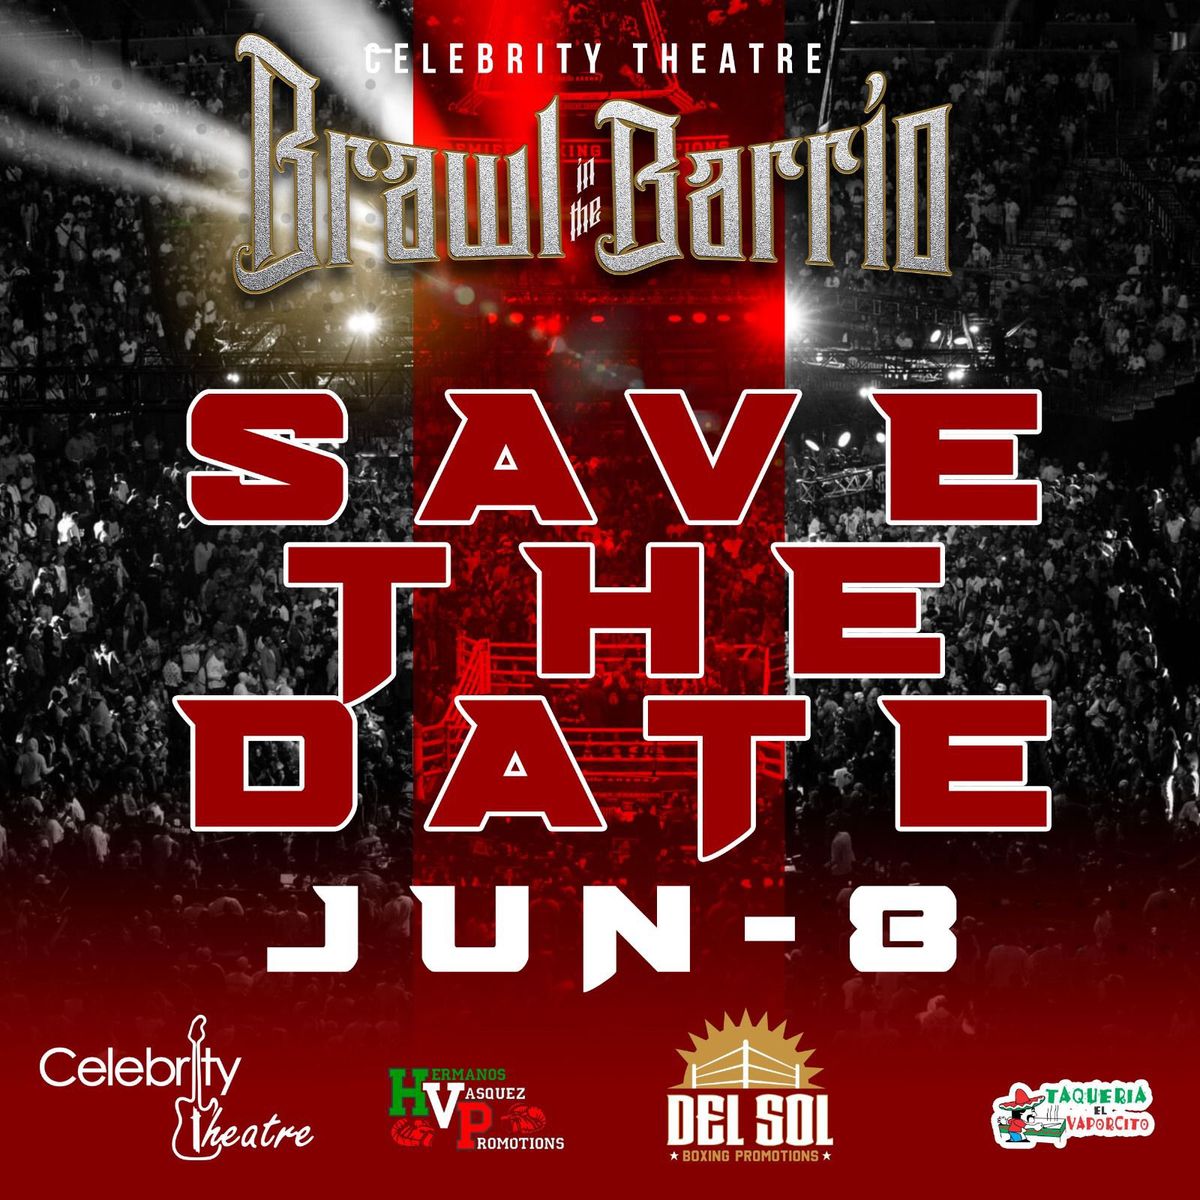 Del Sol Boxing Promotions presents Brawl in the Barrio